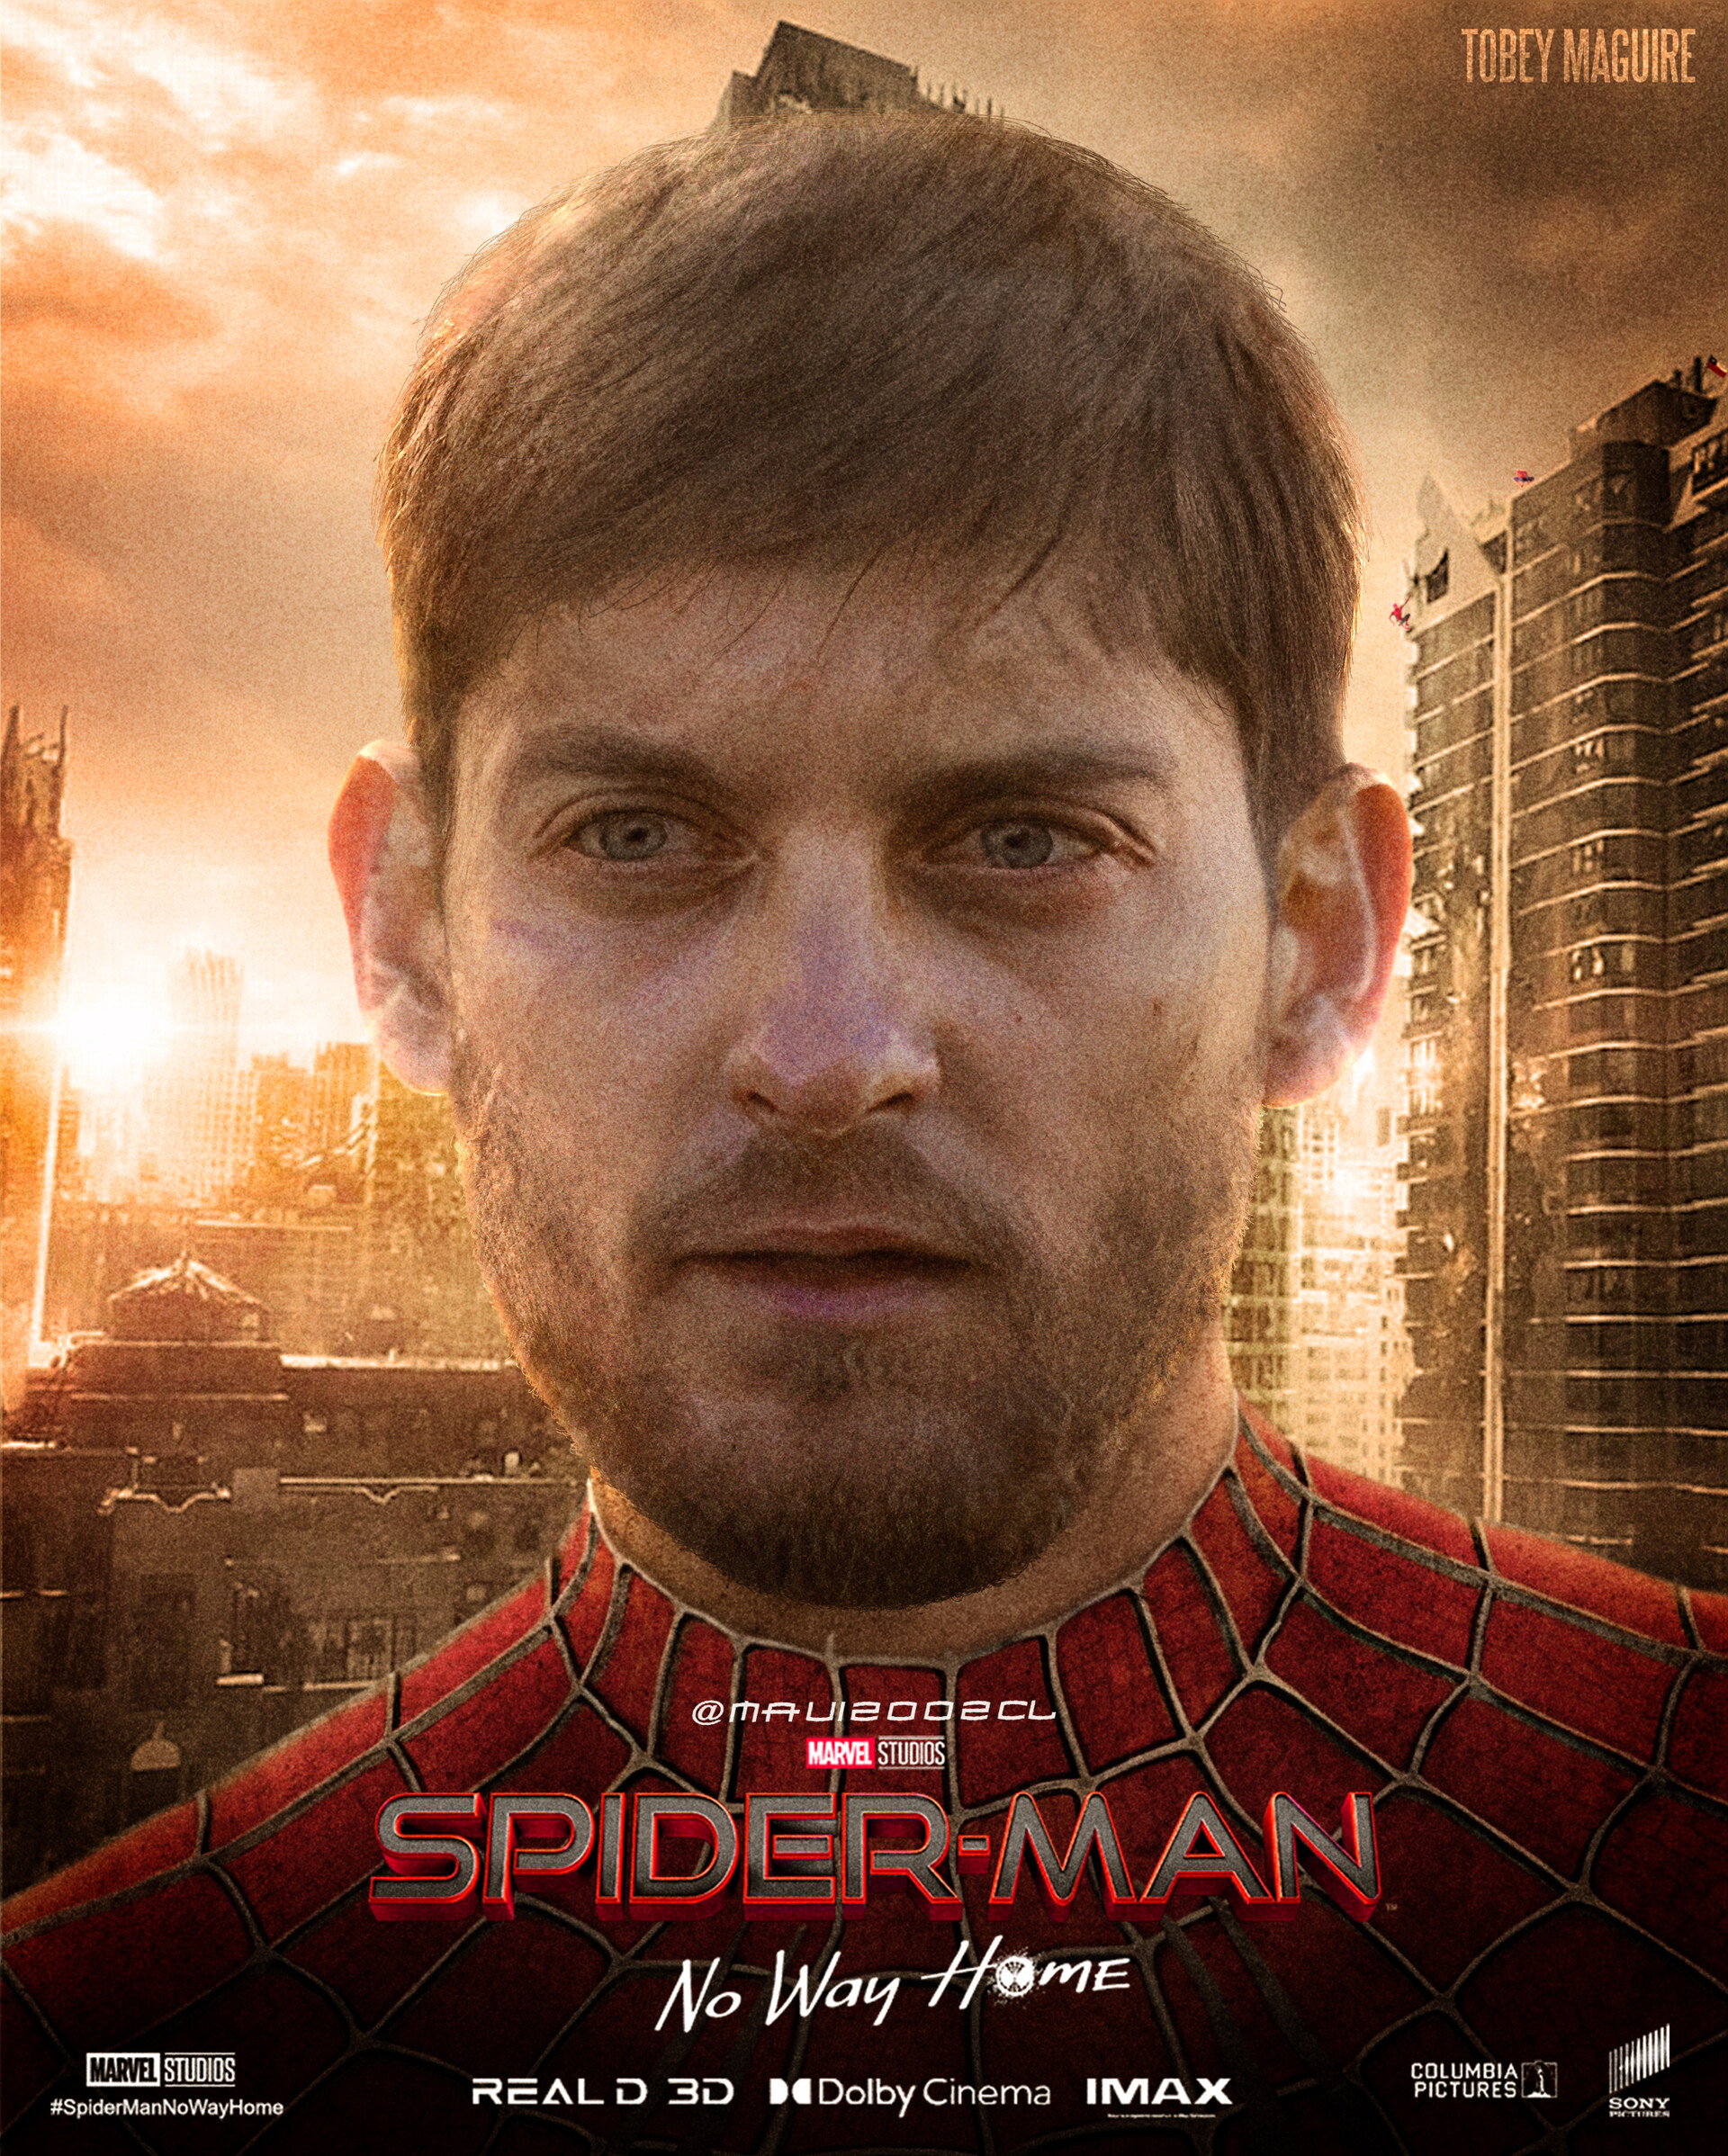 No home tobey man spider maguire way Tobey Maguire